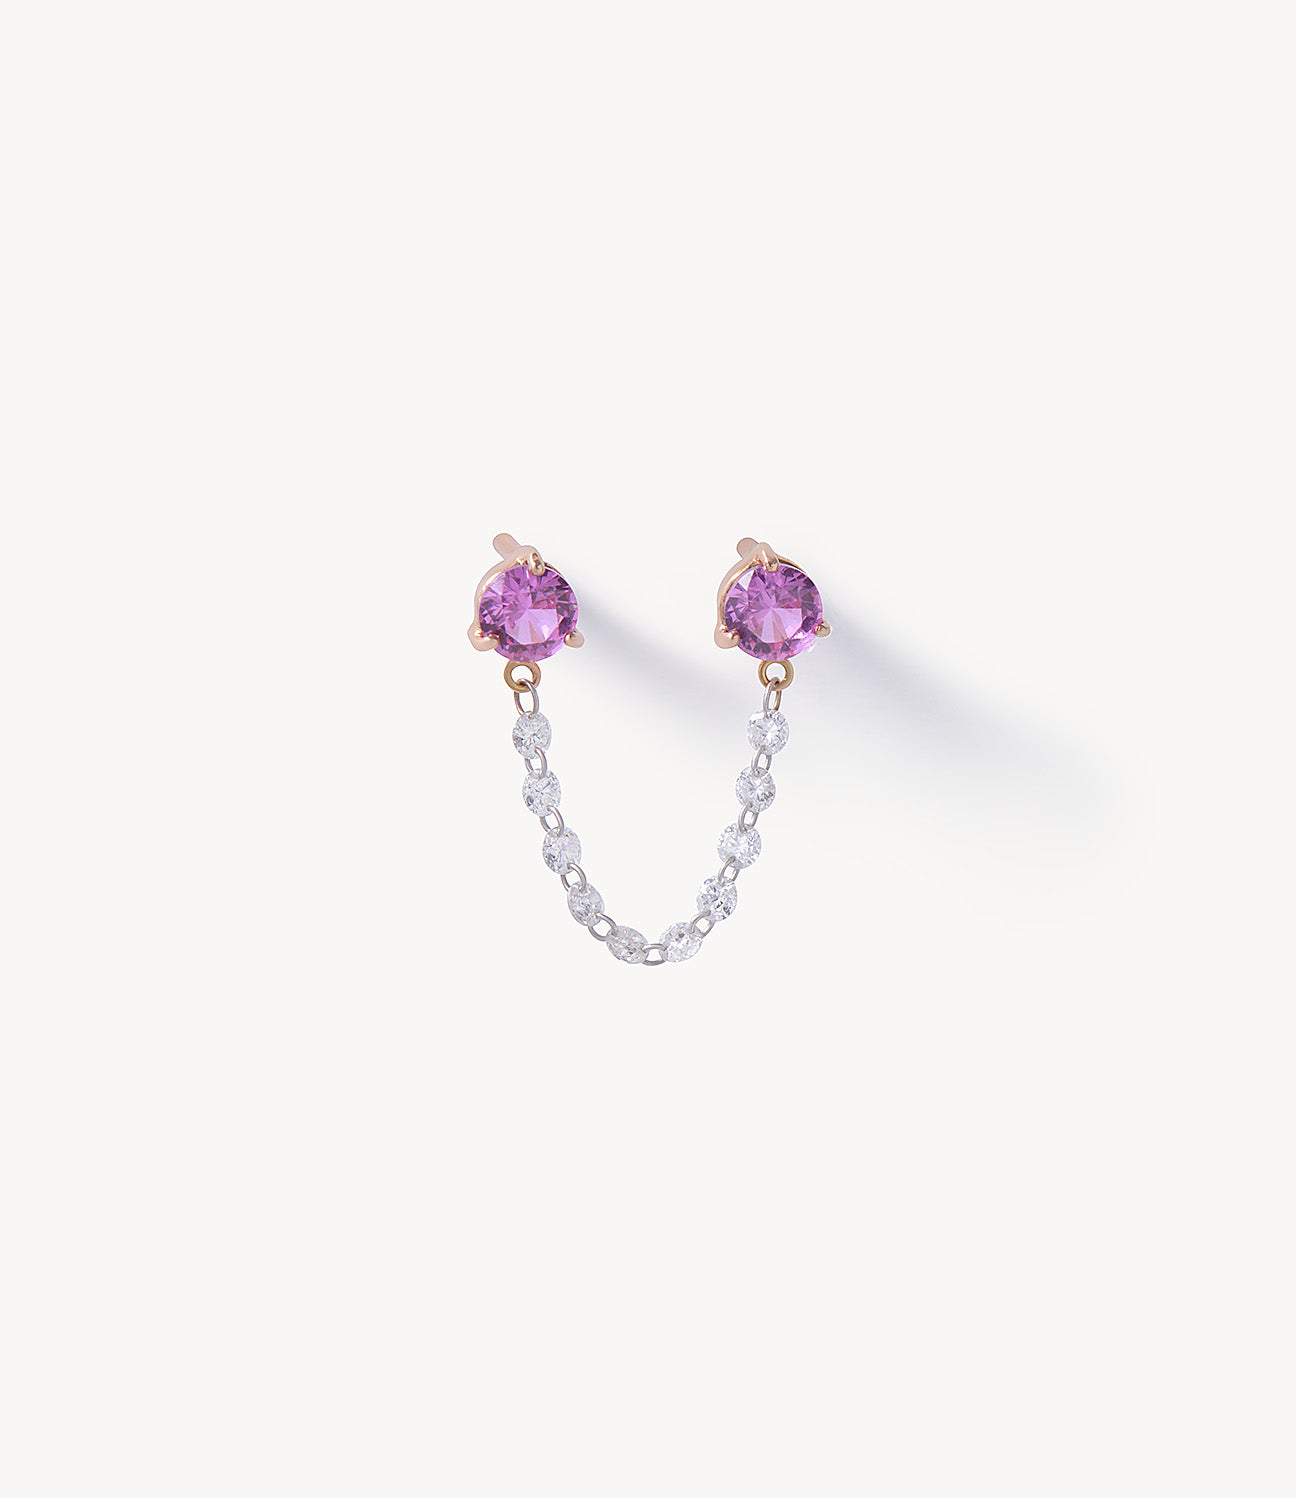 Double Pink Sapphire Stud Earrings with Drilled Diamond Chain